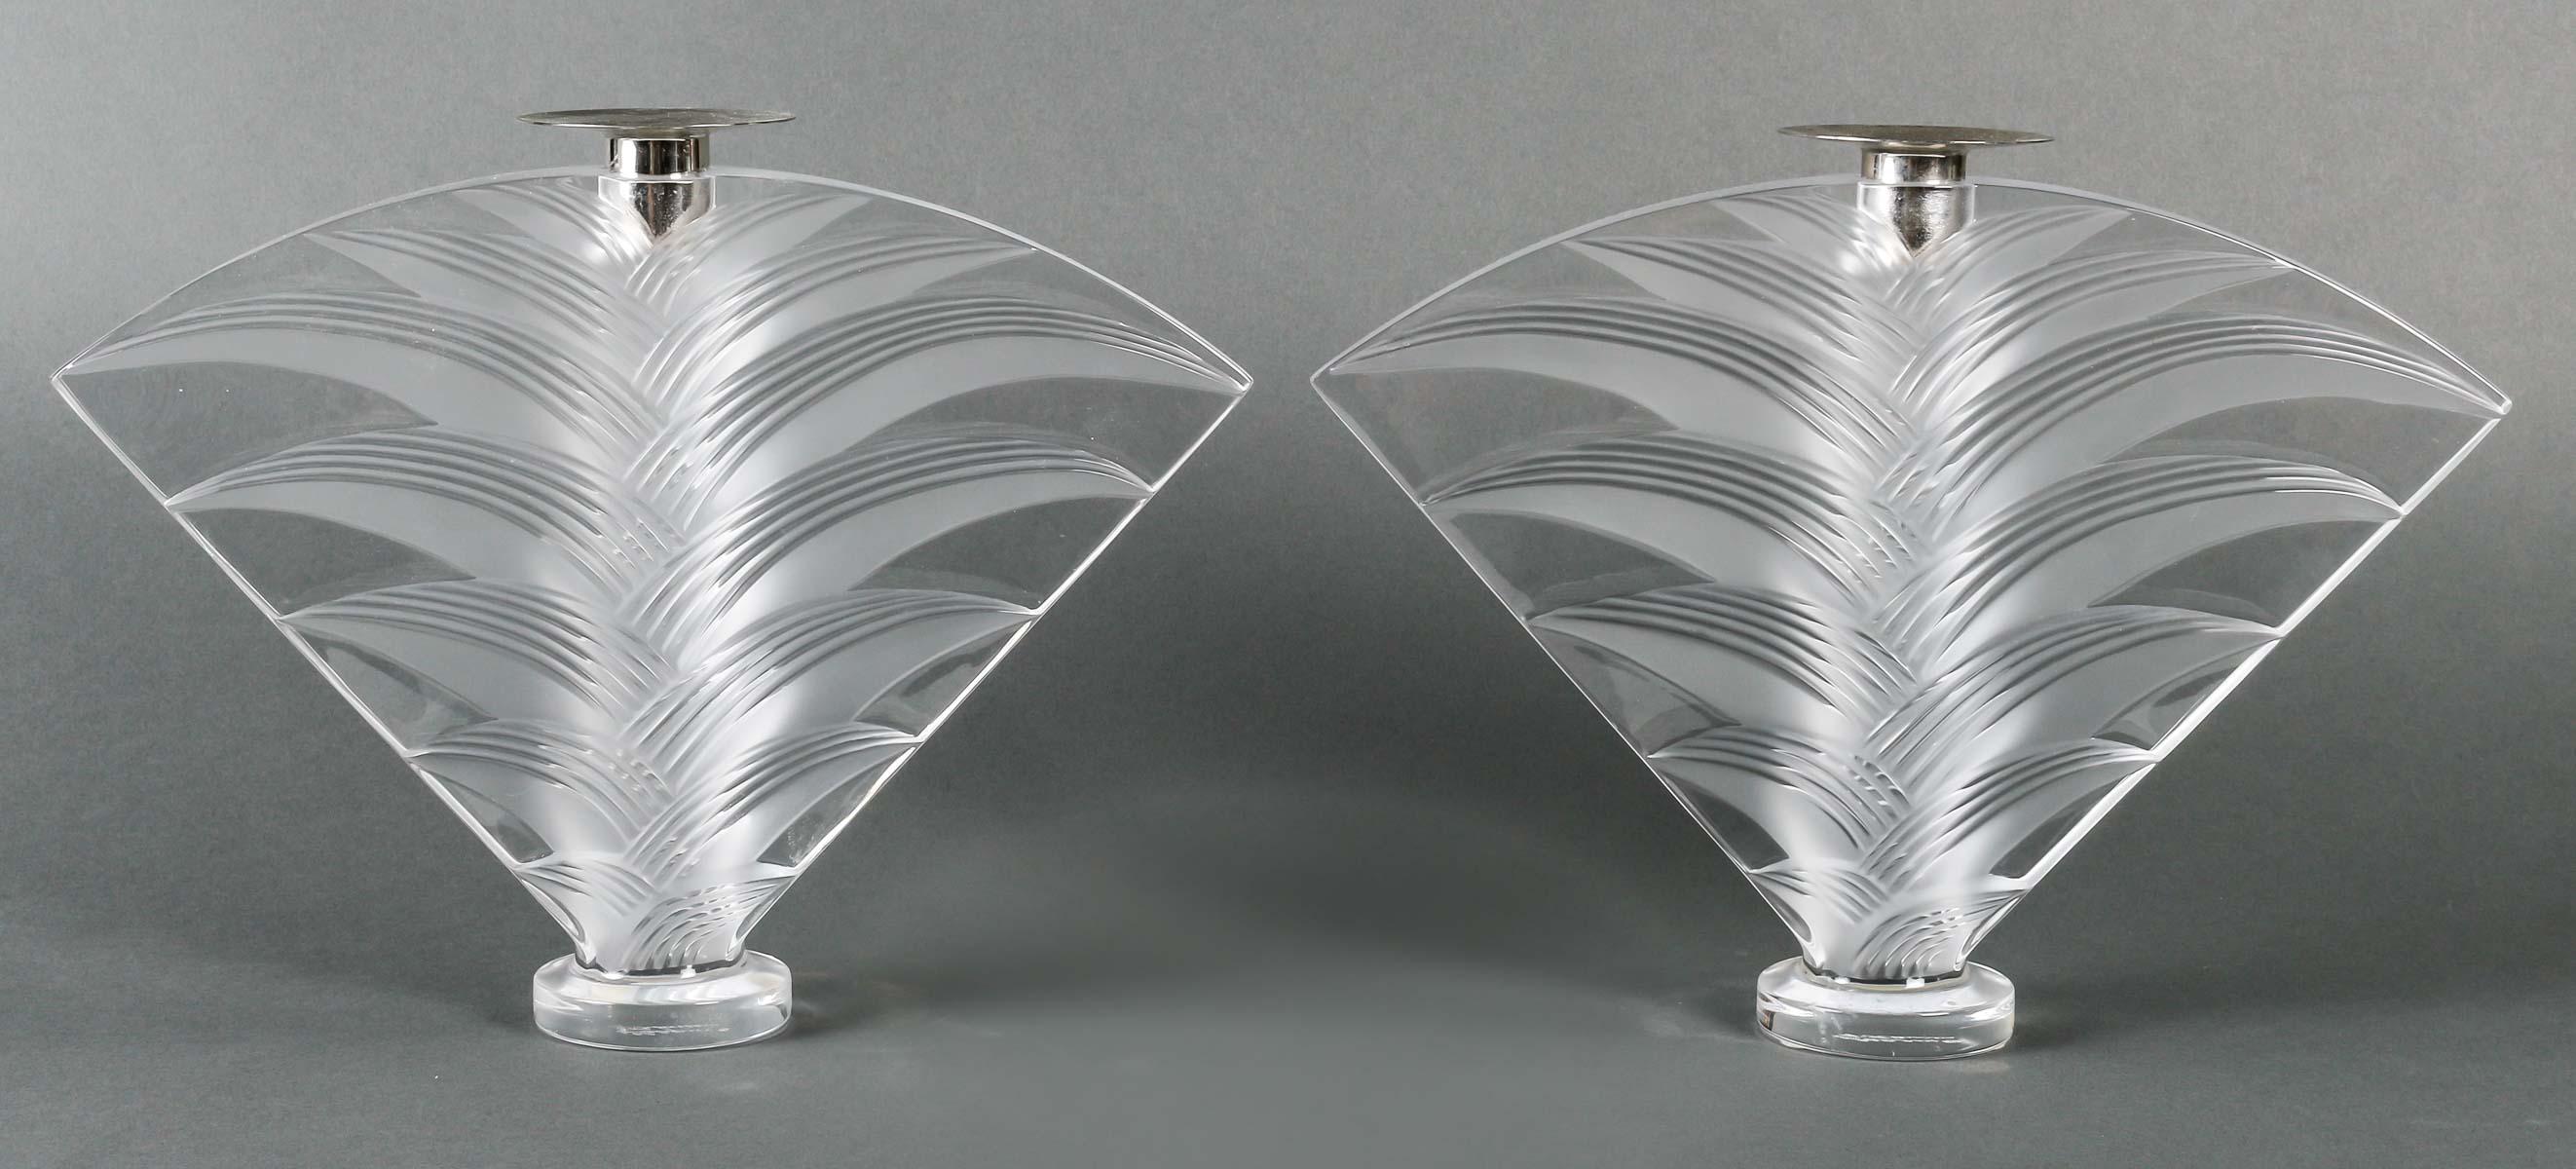 Pair of Lalique Crystal Candlesticks, 20th Century. For Sale 3